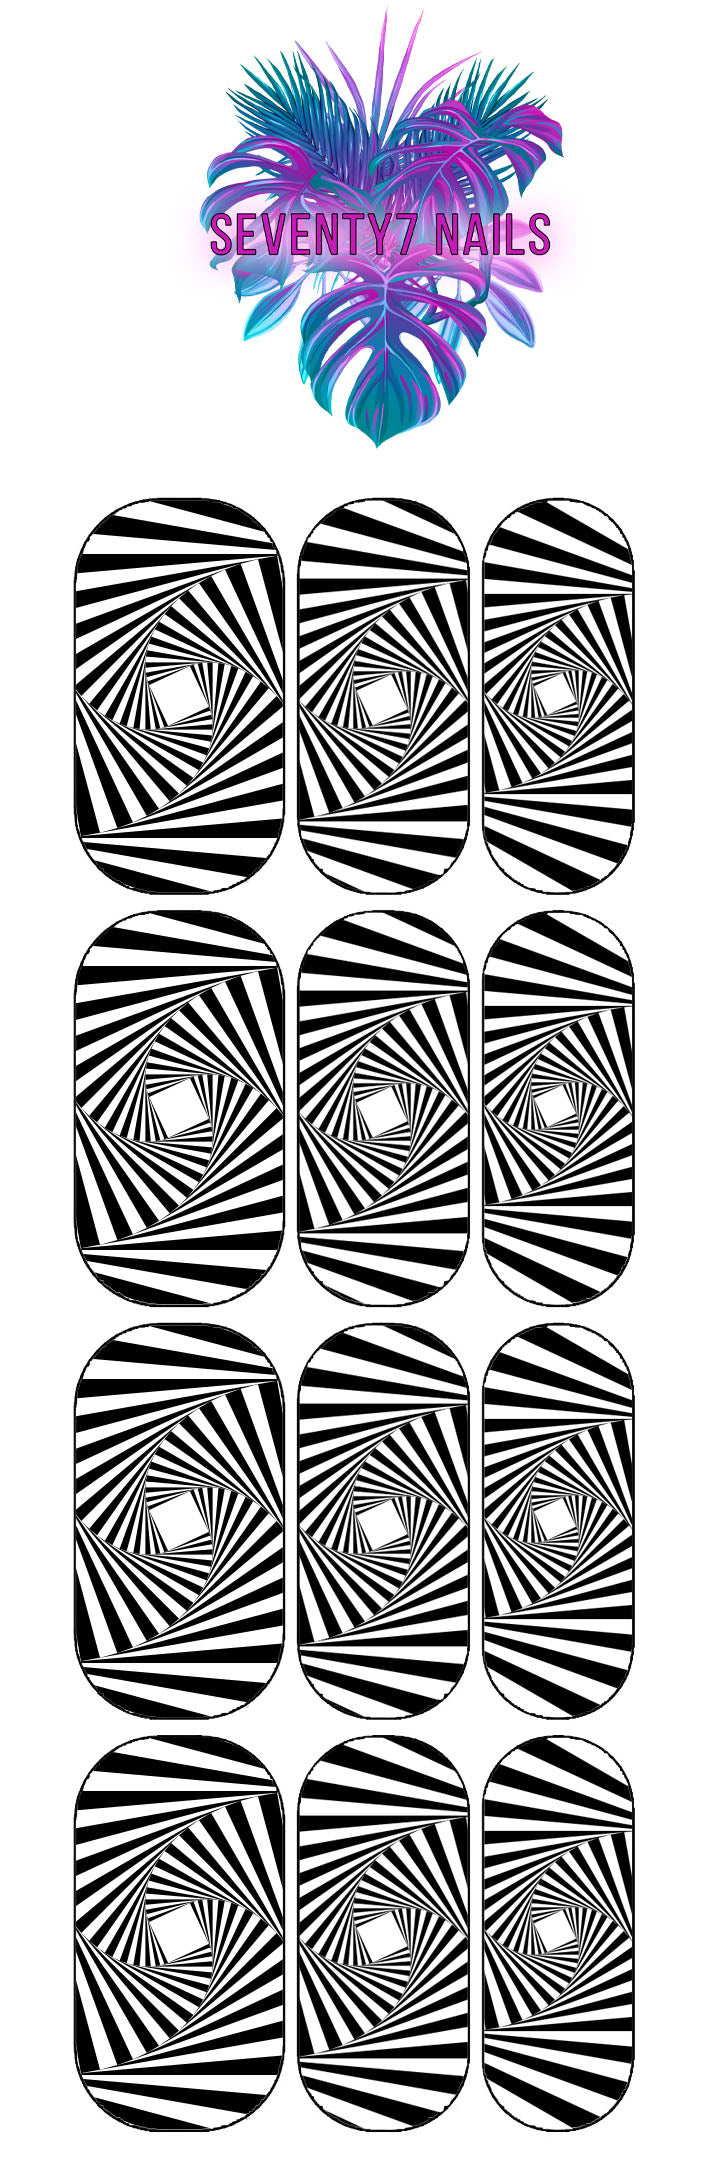 Waterslide Nail Decals - Optical Illusion